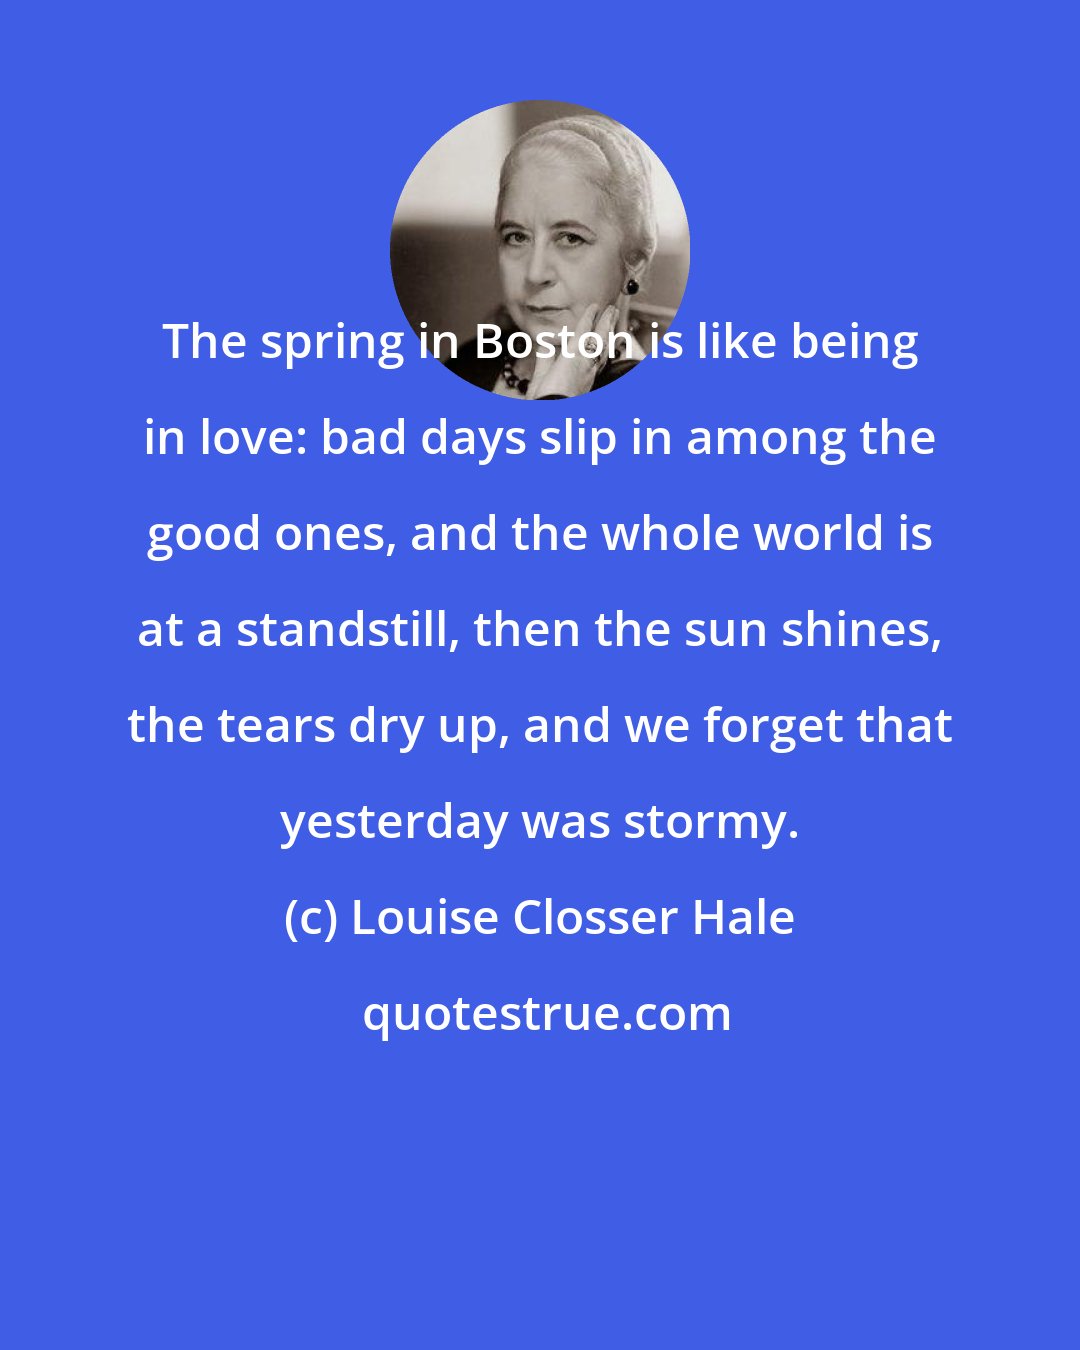 Louise Closser Hale: The spring in Boston is like being in love: bad days slip in among the good ones, and the whole world is at a standstill, then the sun shines, the tears dry up, and we forget that yesterday was stormy.